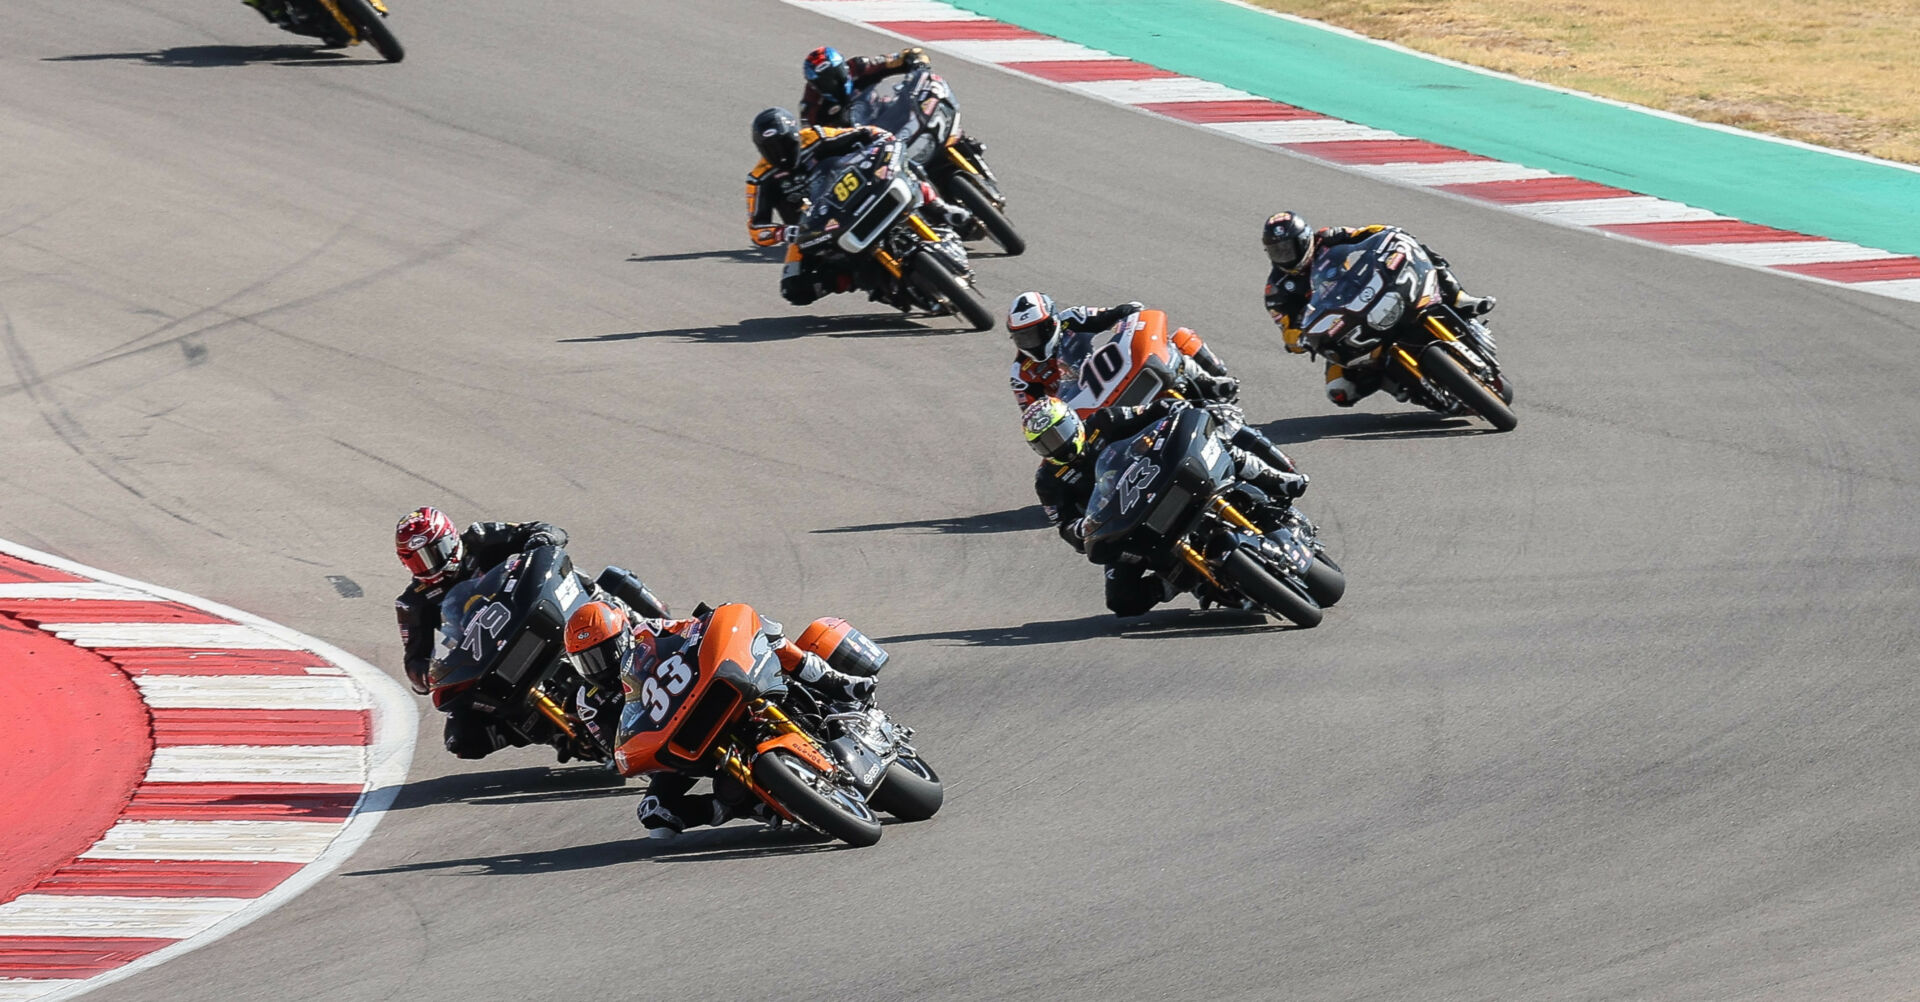 Kyle Wyman (33) leads Hayden Gillim (79), James Rispoli (43), Travis Wyman (10), Bobby Fong (50), and the rest of the King Of The Baggers field at COTA in 2023. Photo by Brian J. Nelson.